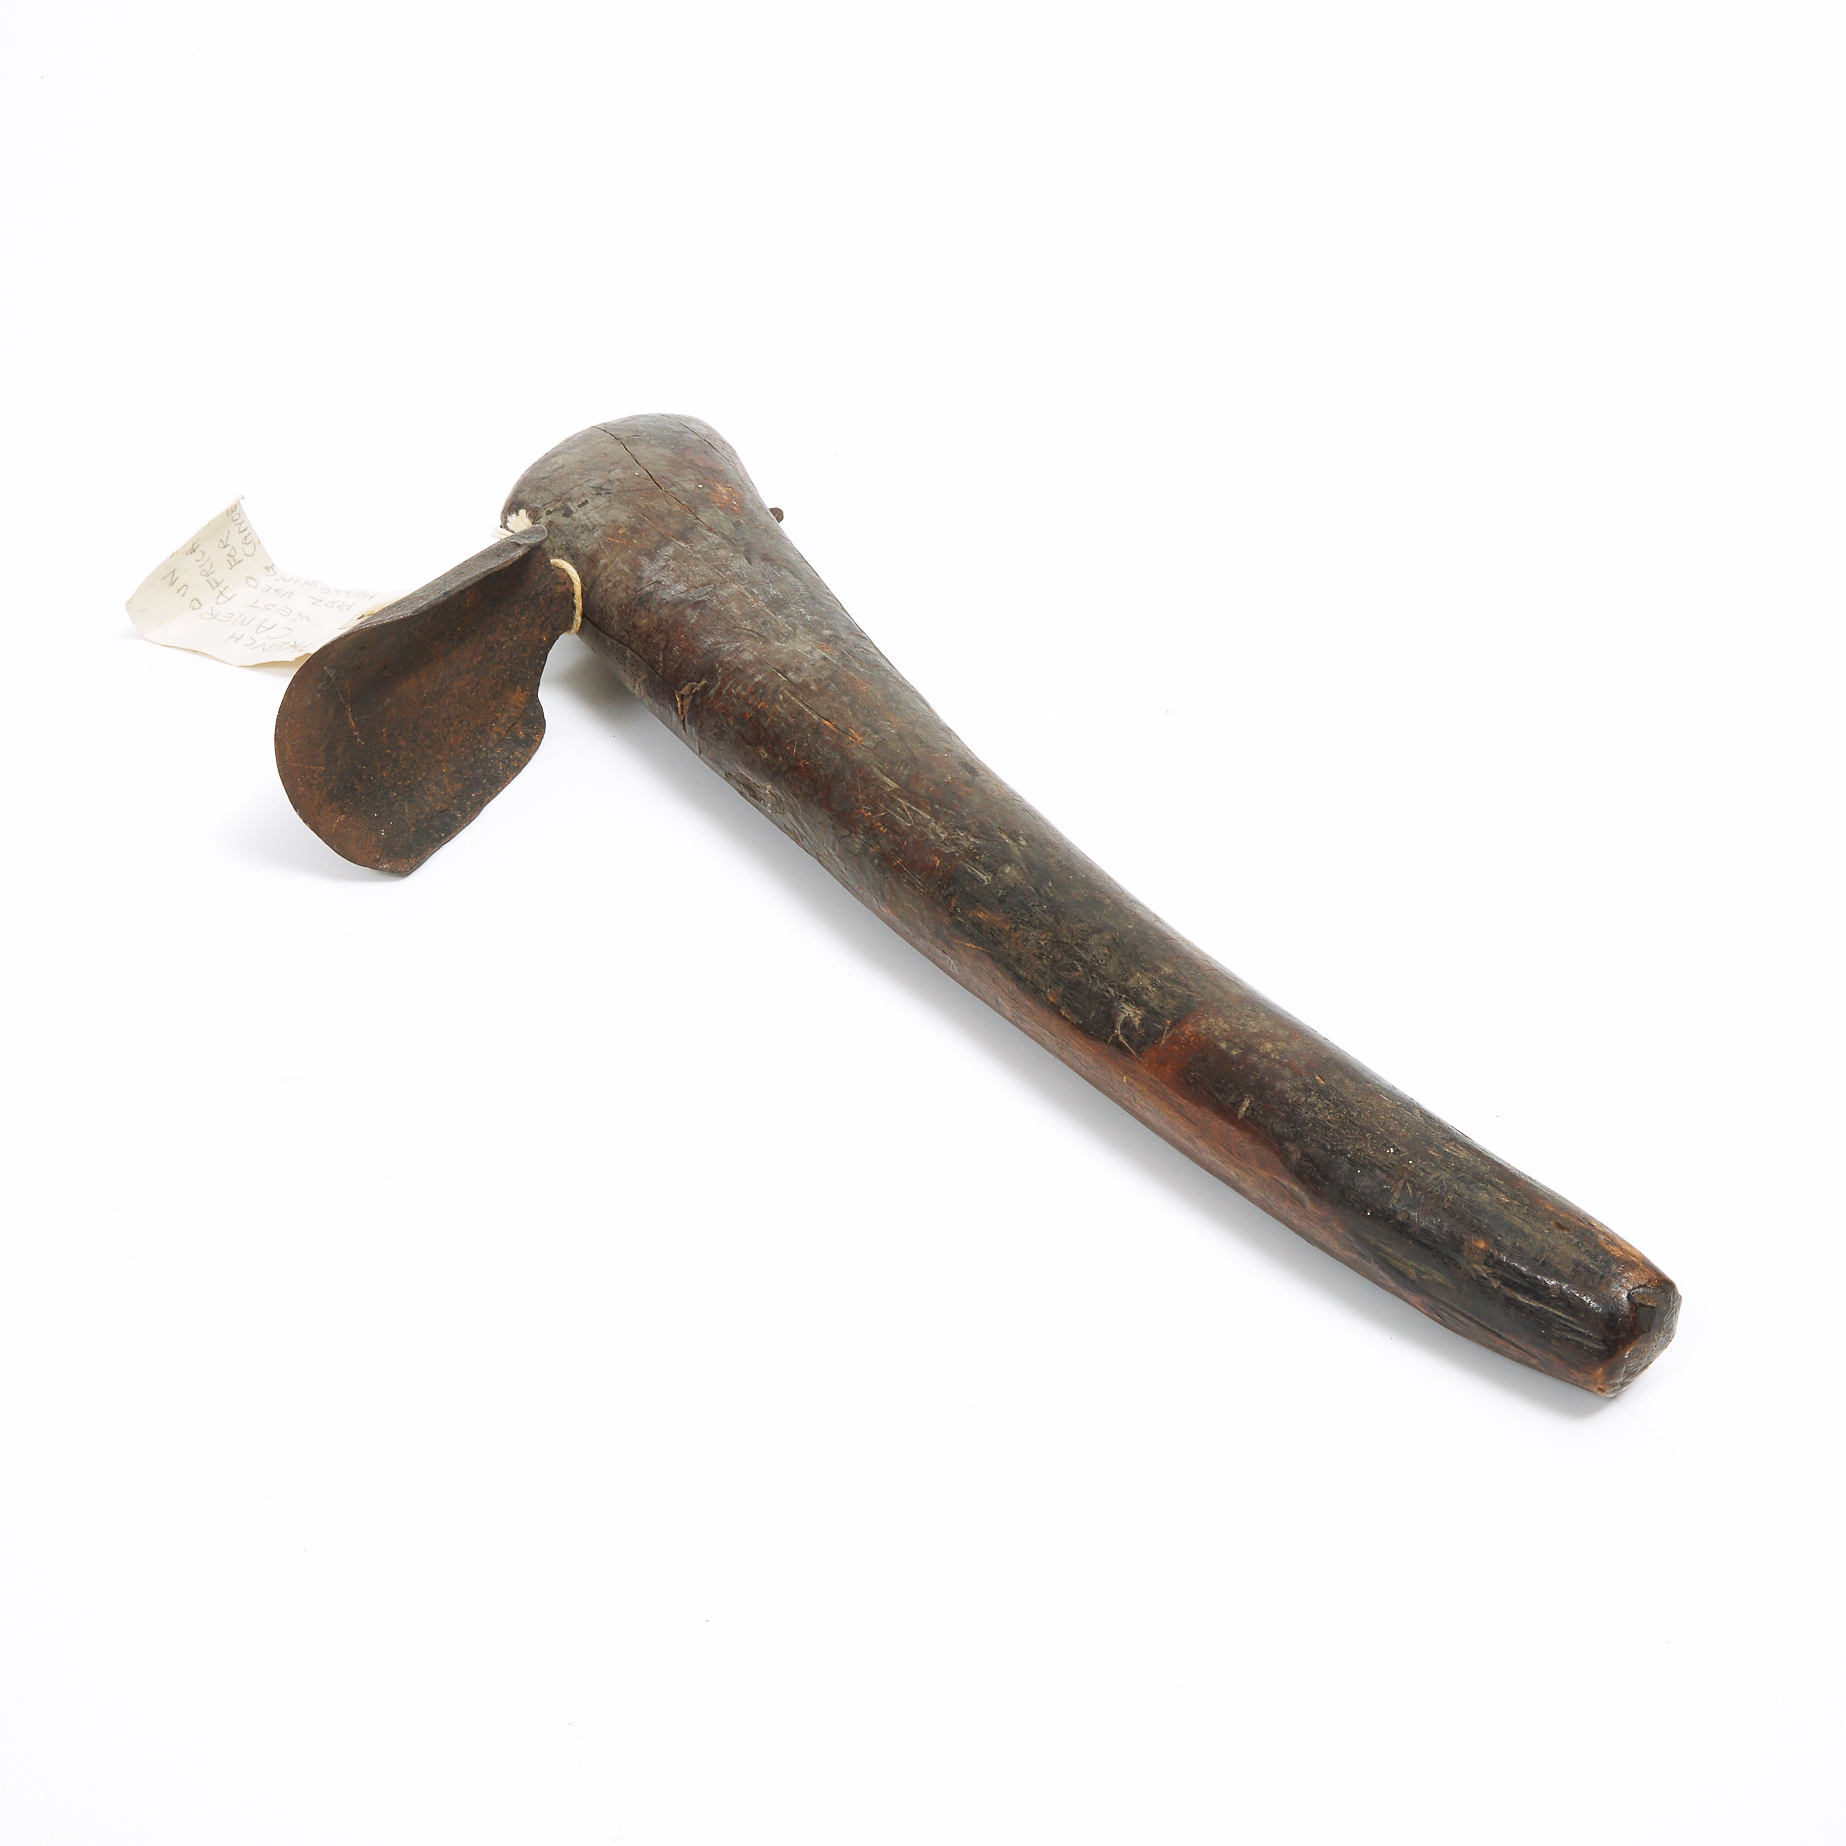 African Adz Axe, possibly Cameroon, late 19th/ early 20th century